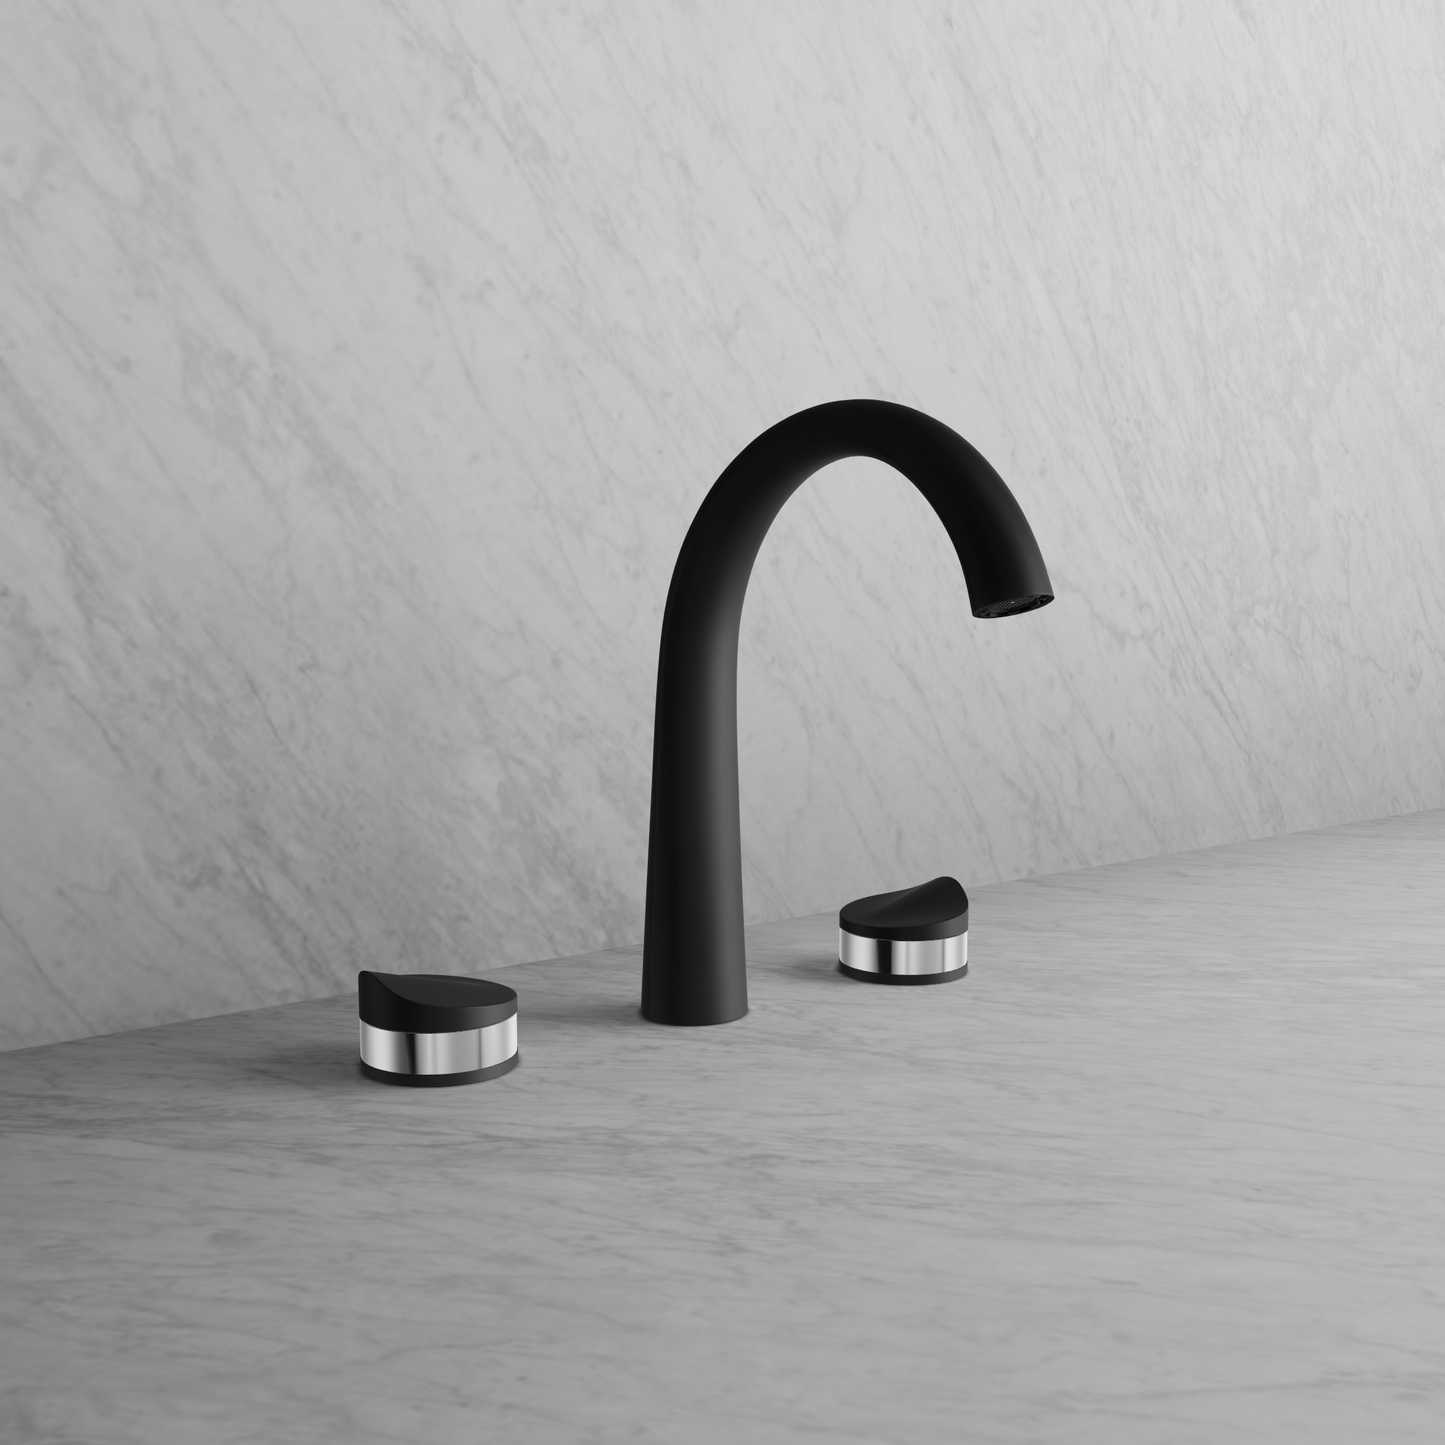 Baril8" C/c Lavatory Faucet with Drain Included (FLORA) - Matte Black Variations